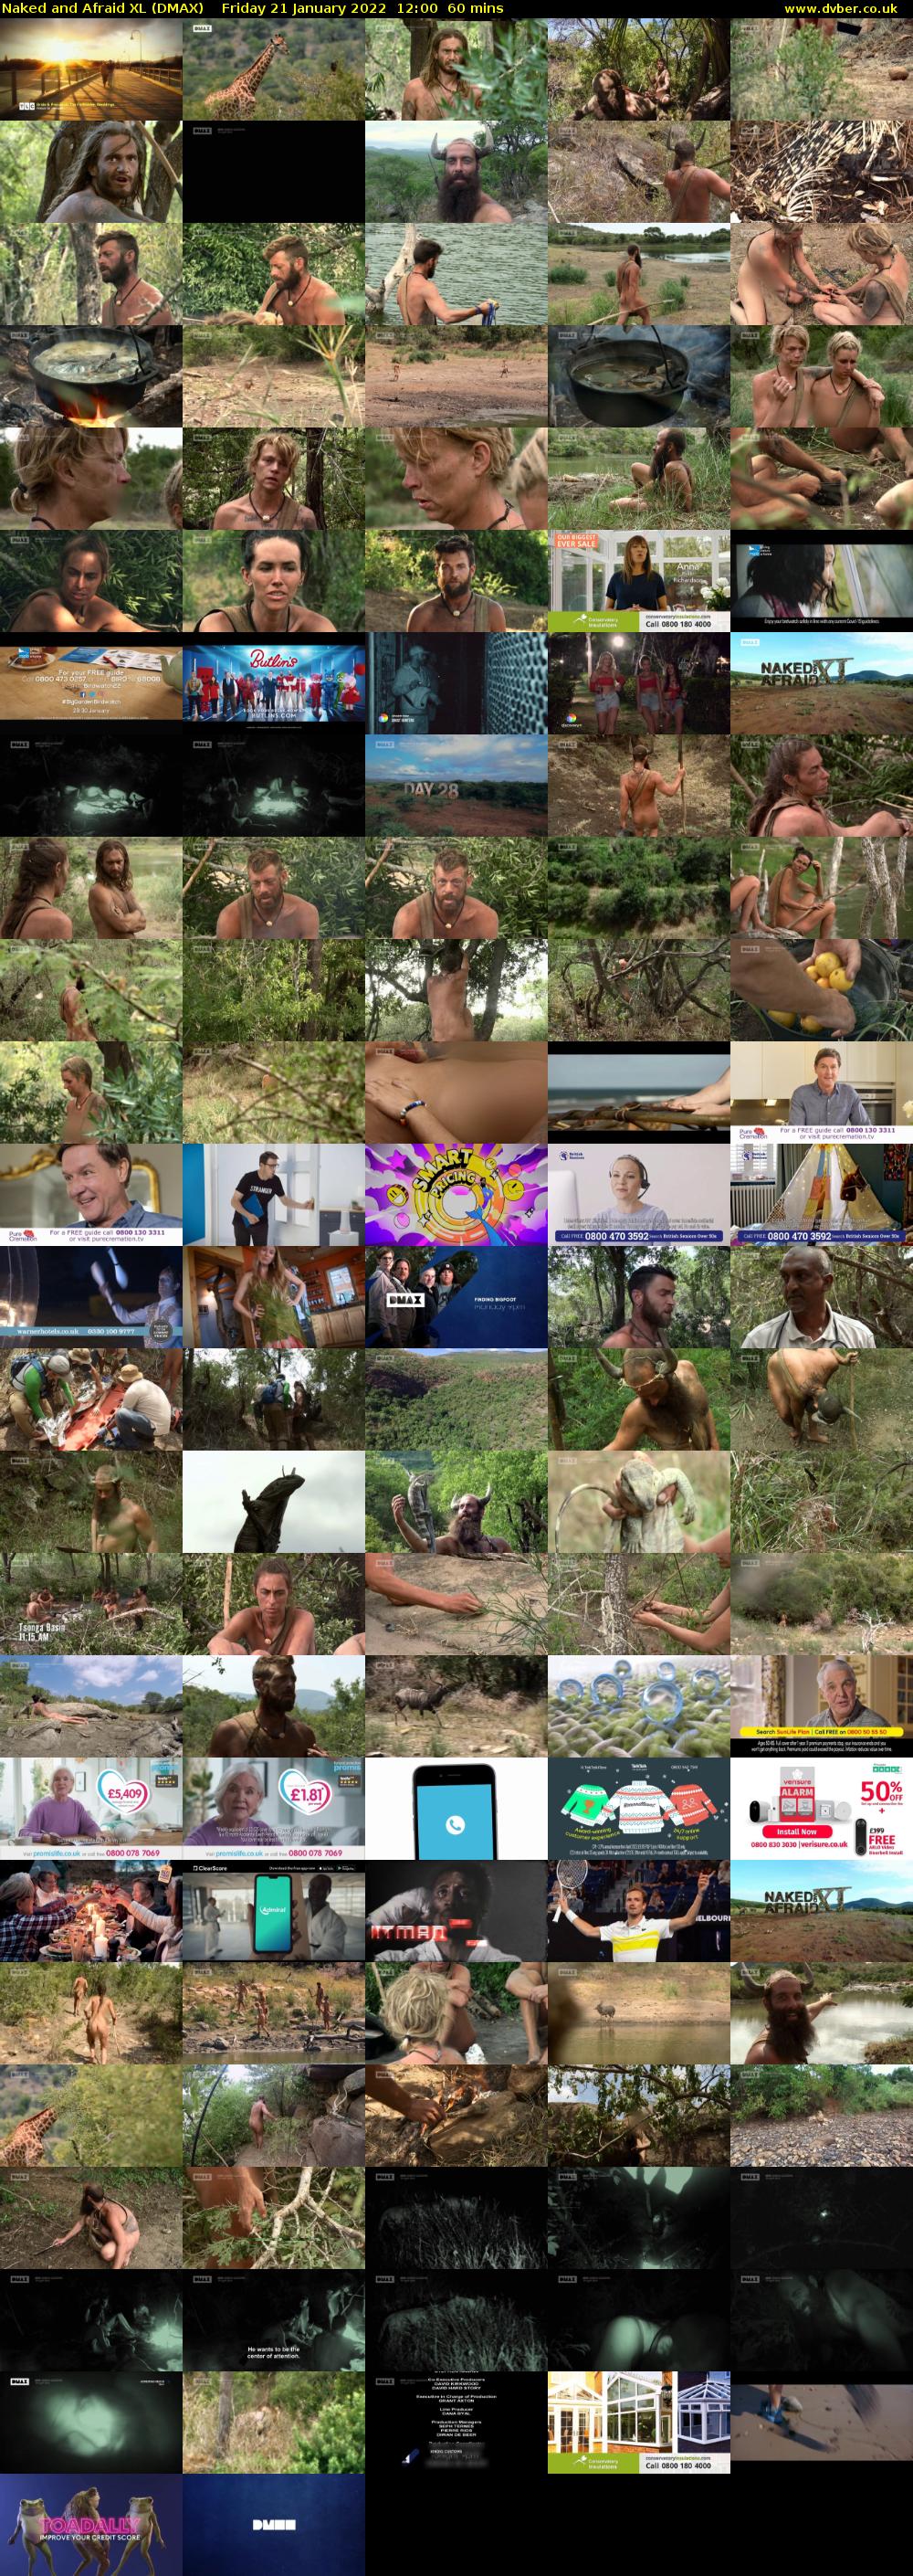 Naked and Afraid XL (DMAX) Friday 21 January 2022 12:00 - 13:00